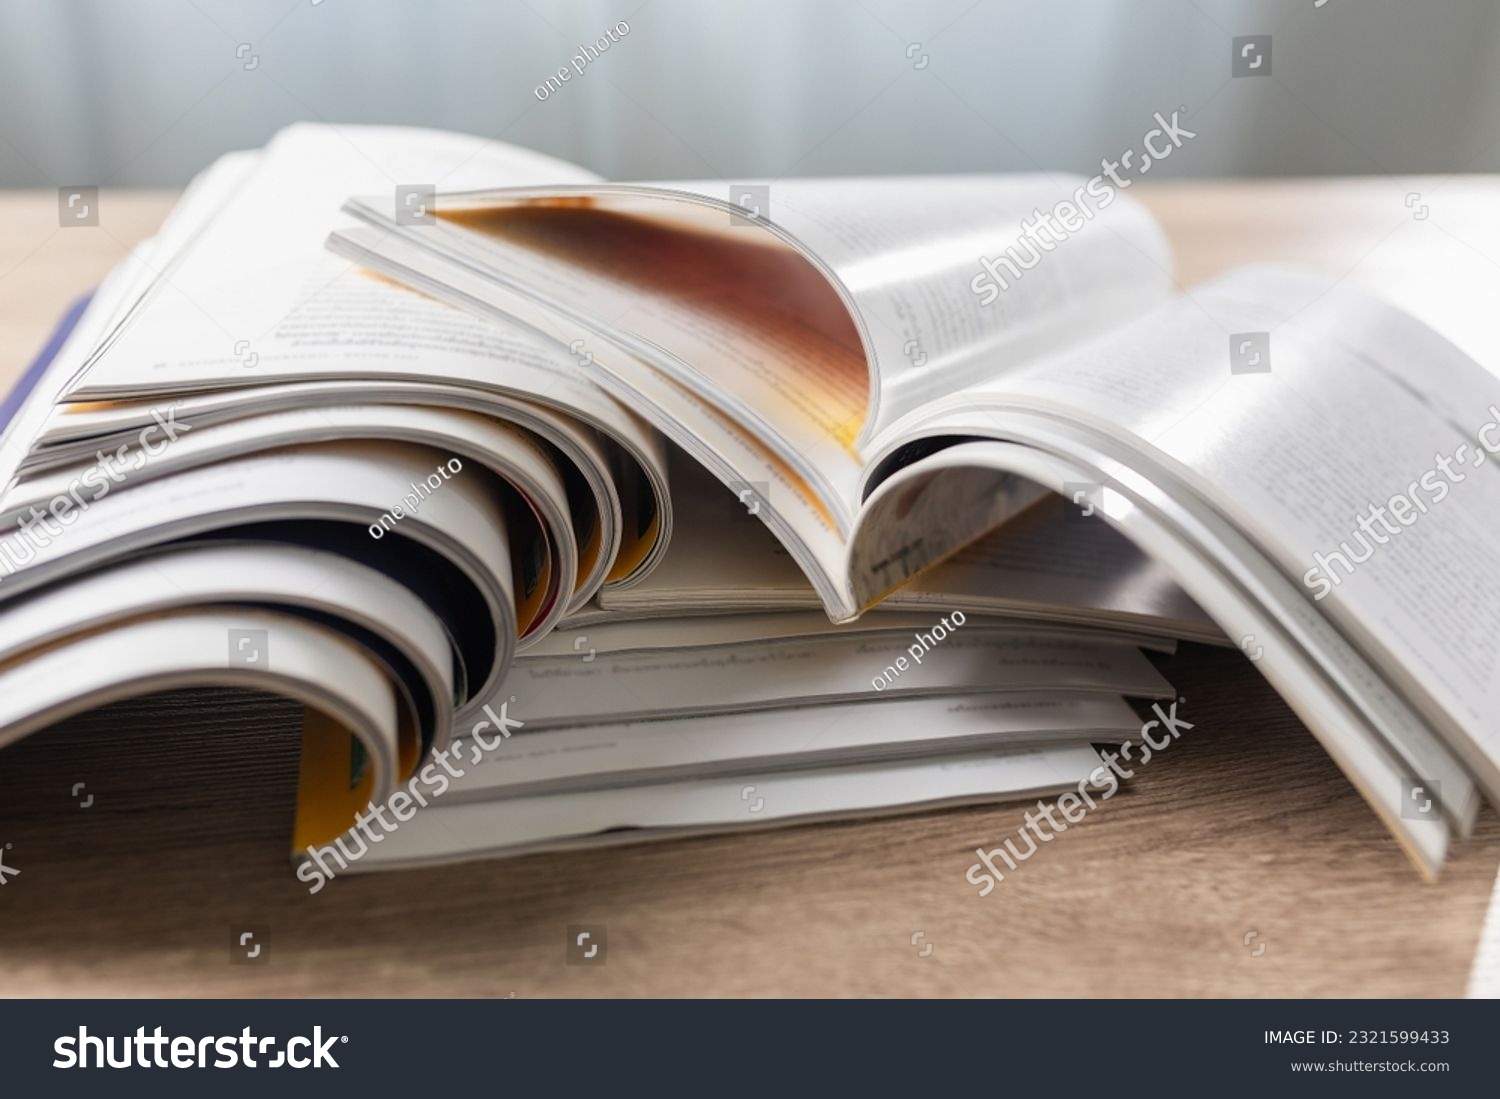 Magazines publication Newspaper and journal books: background and catalog design; article magazine press; newspaper media book knowledge; document advertising datum textbook #2321599433